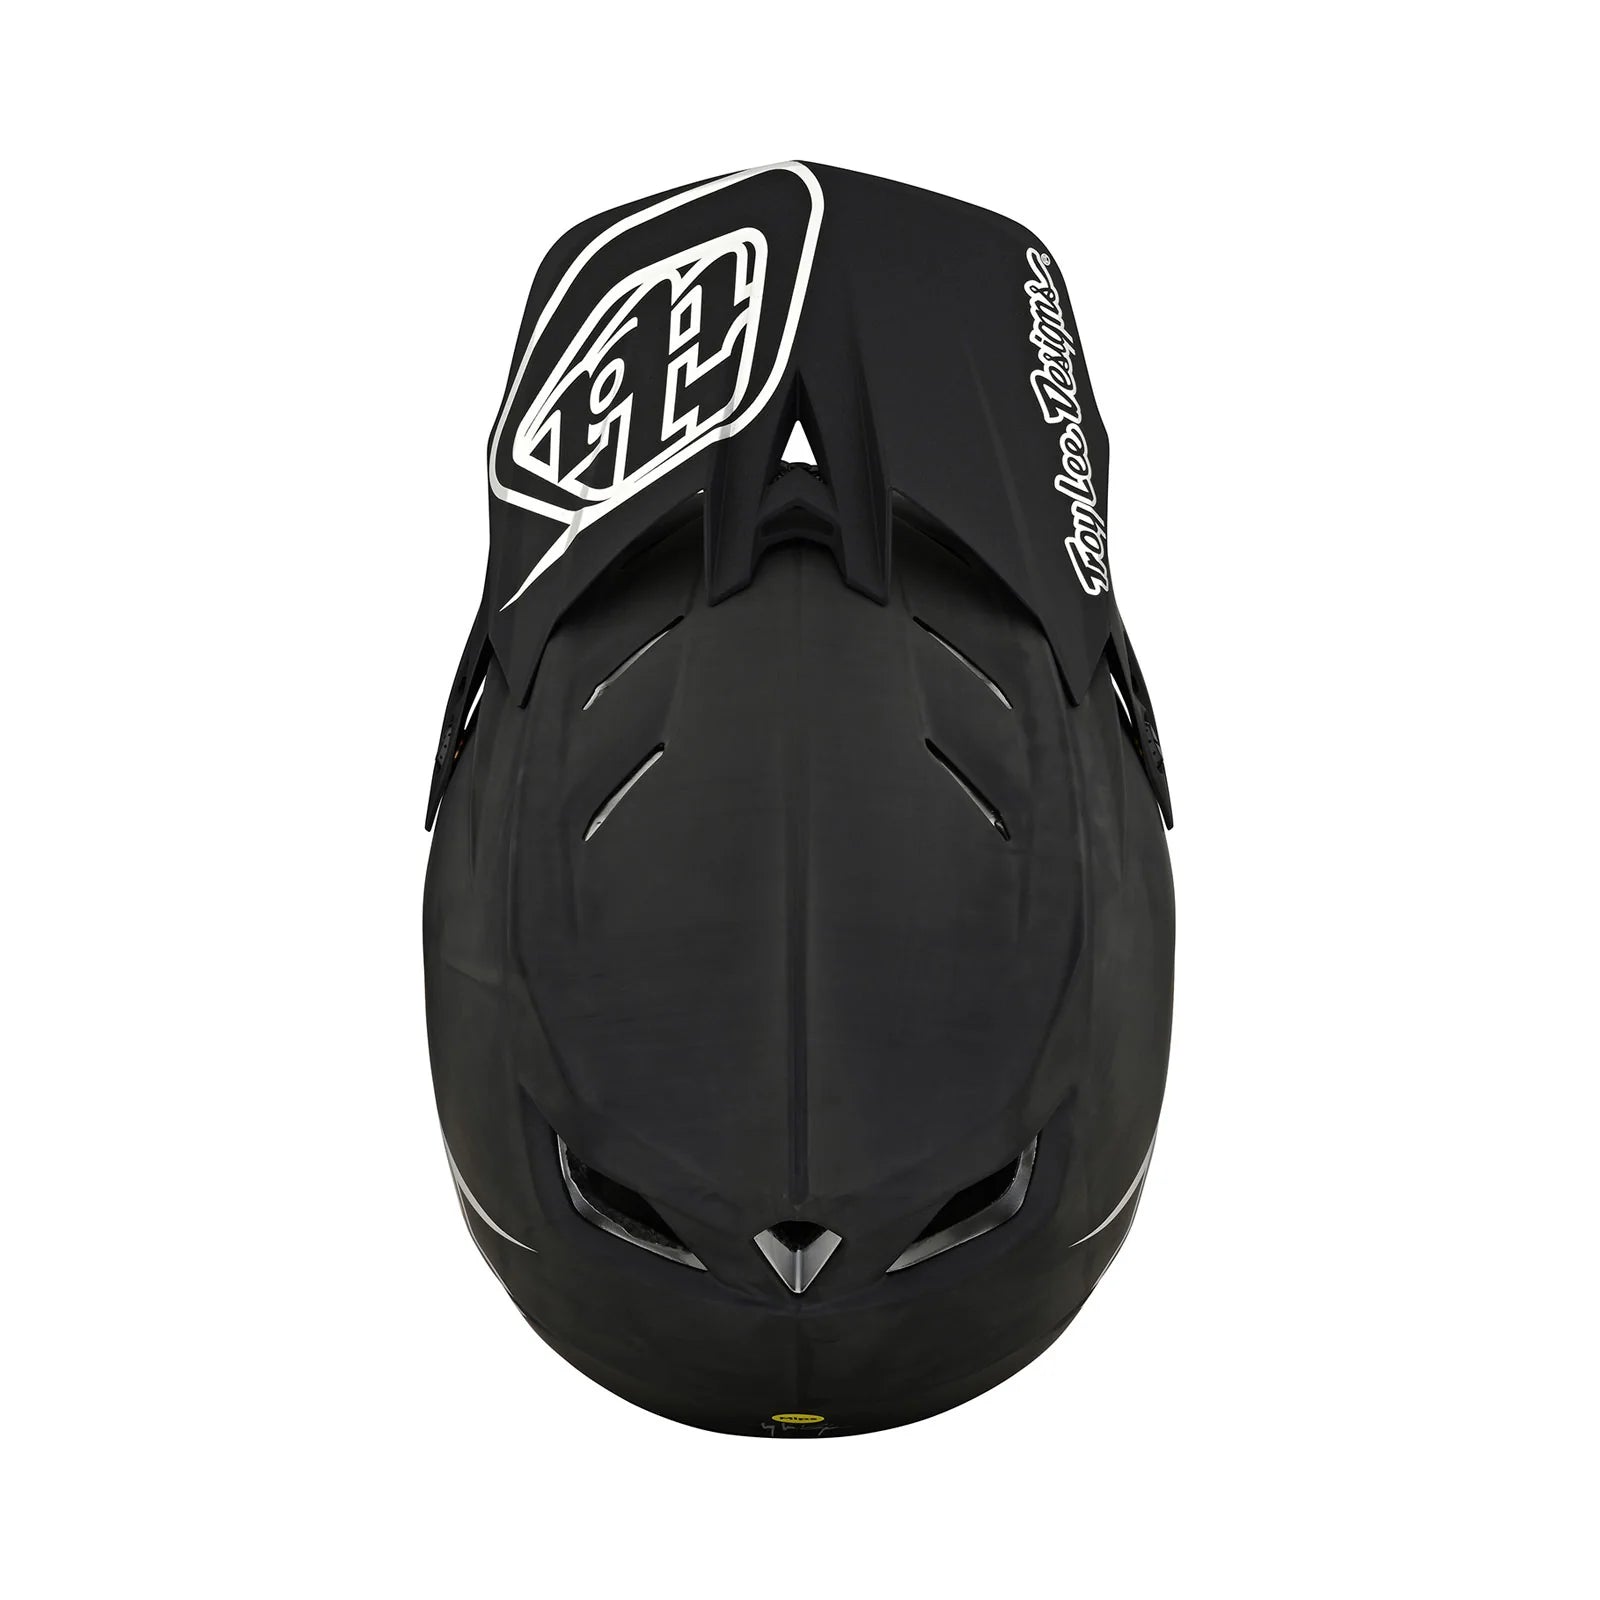 A black TLD D4 AS Carbon W/MIPS Helmet with a white logo on it.